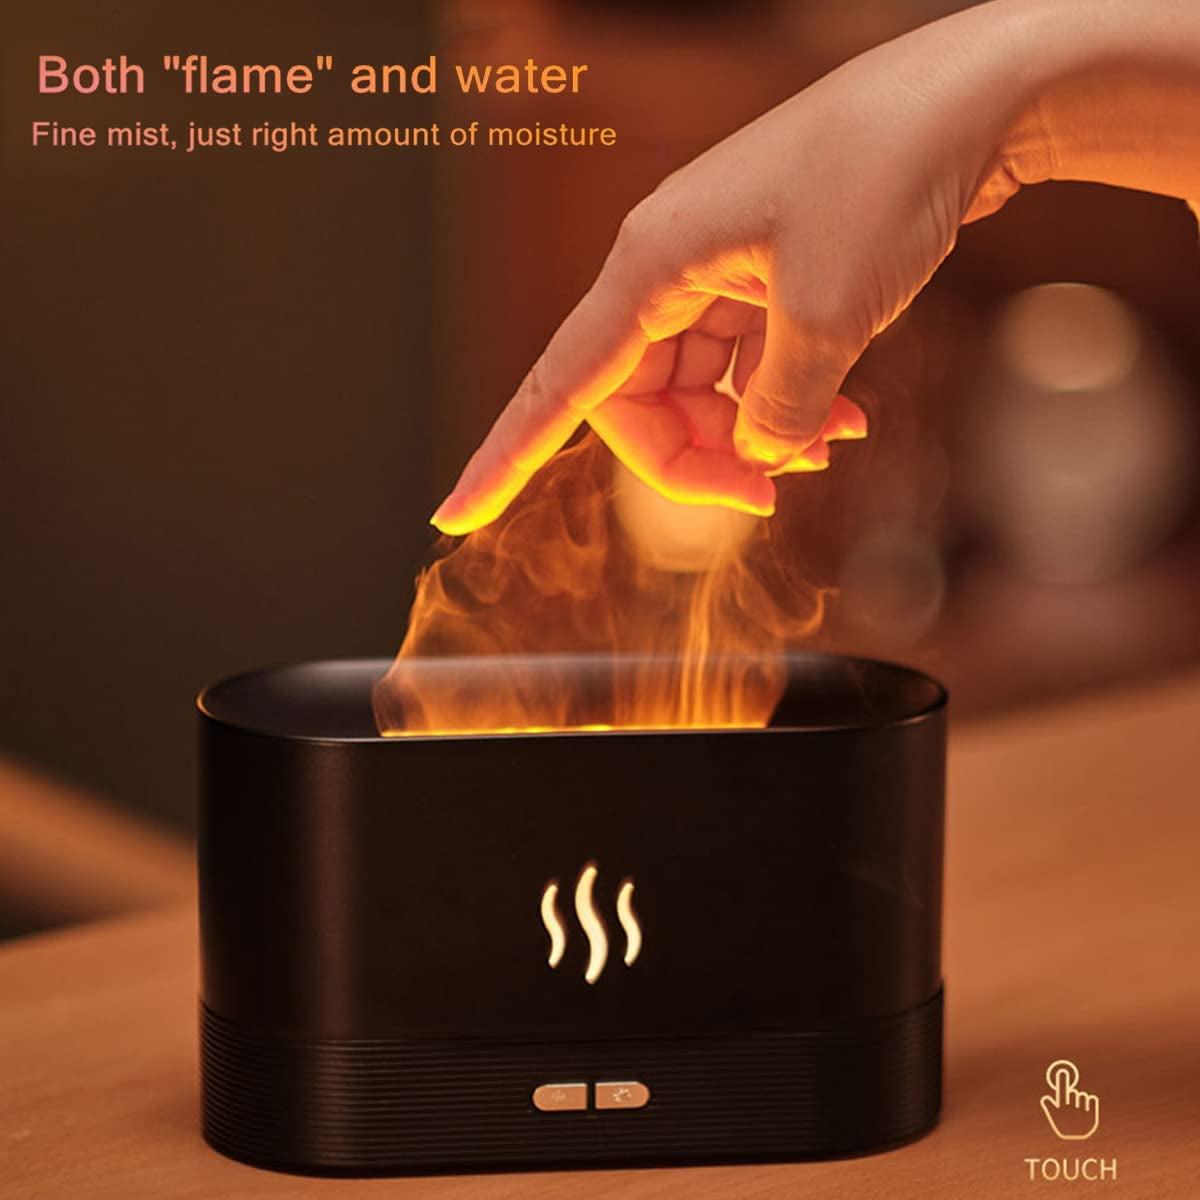 Essential Oil Diffuser with Flame，180Ml Aroma Diffuser with Flame Night Light USB Ultrasonic Mist Aromatherapy Essential Oil Diffuser，Suitable for Home Office, Bedroom, Automatic Closing (Black)